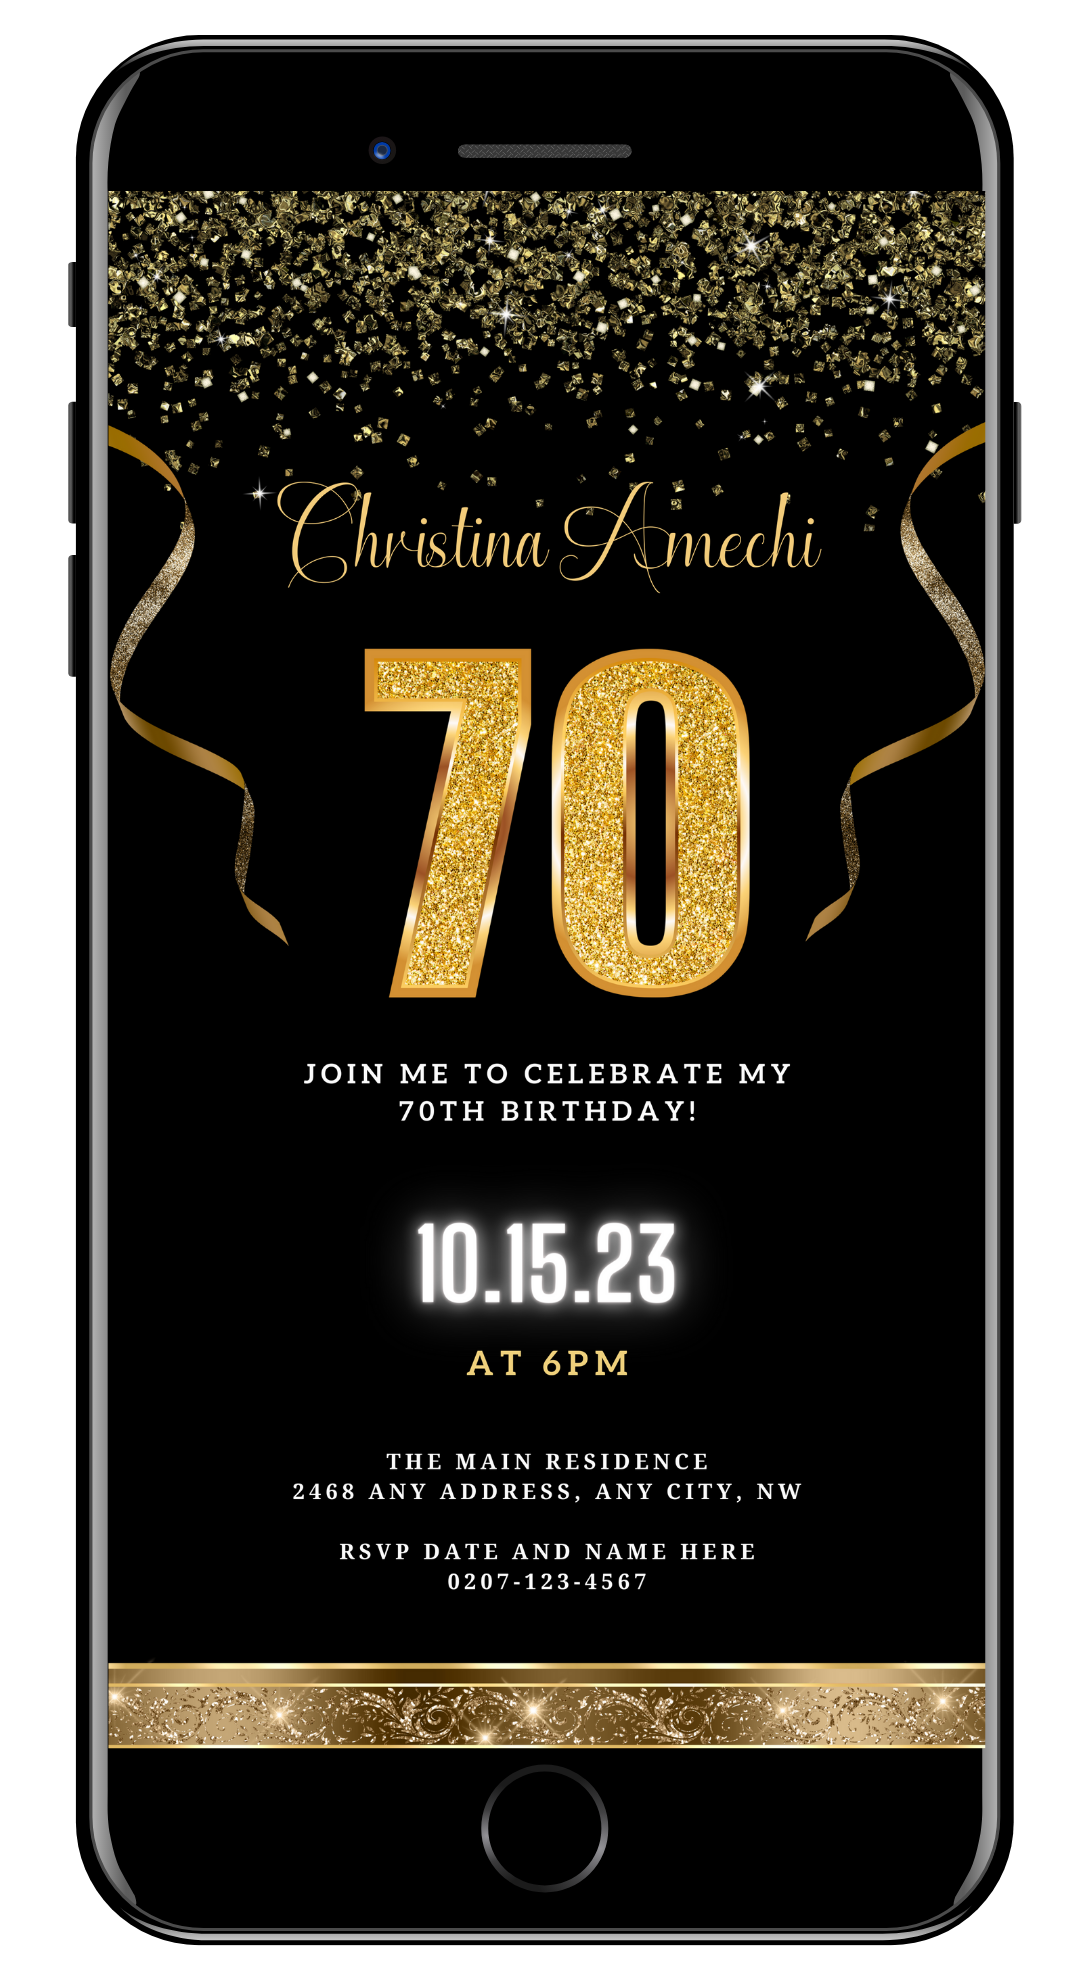 Black Gold Confetti 70th Birthday Evite displayed on a smartphone screen, featuring customizable text and glittery gold elements on a black background.